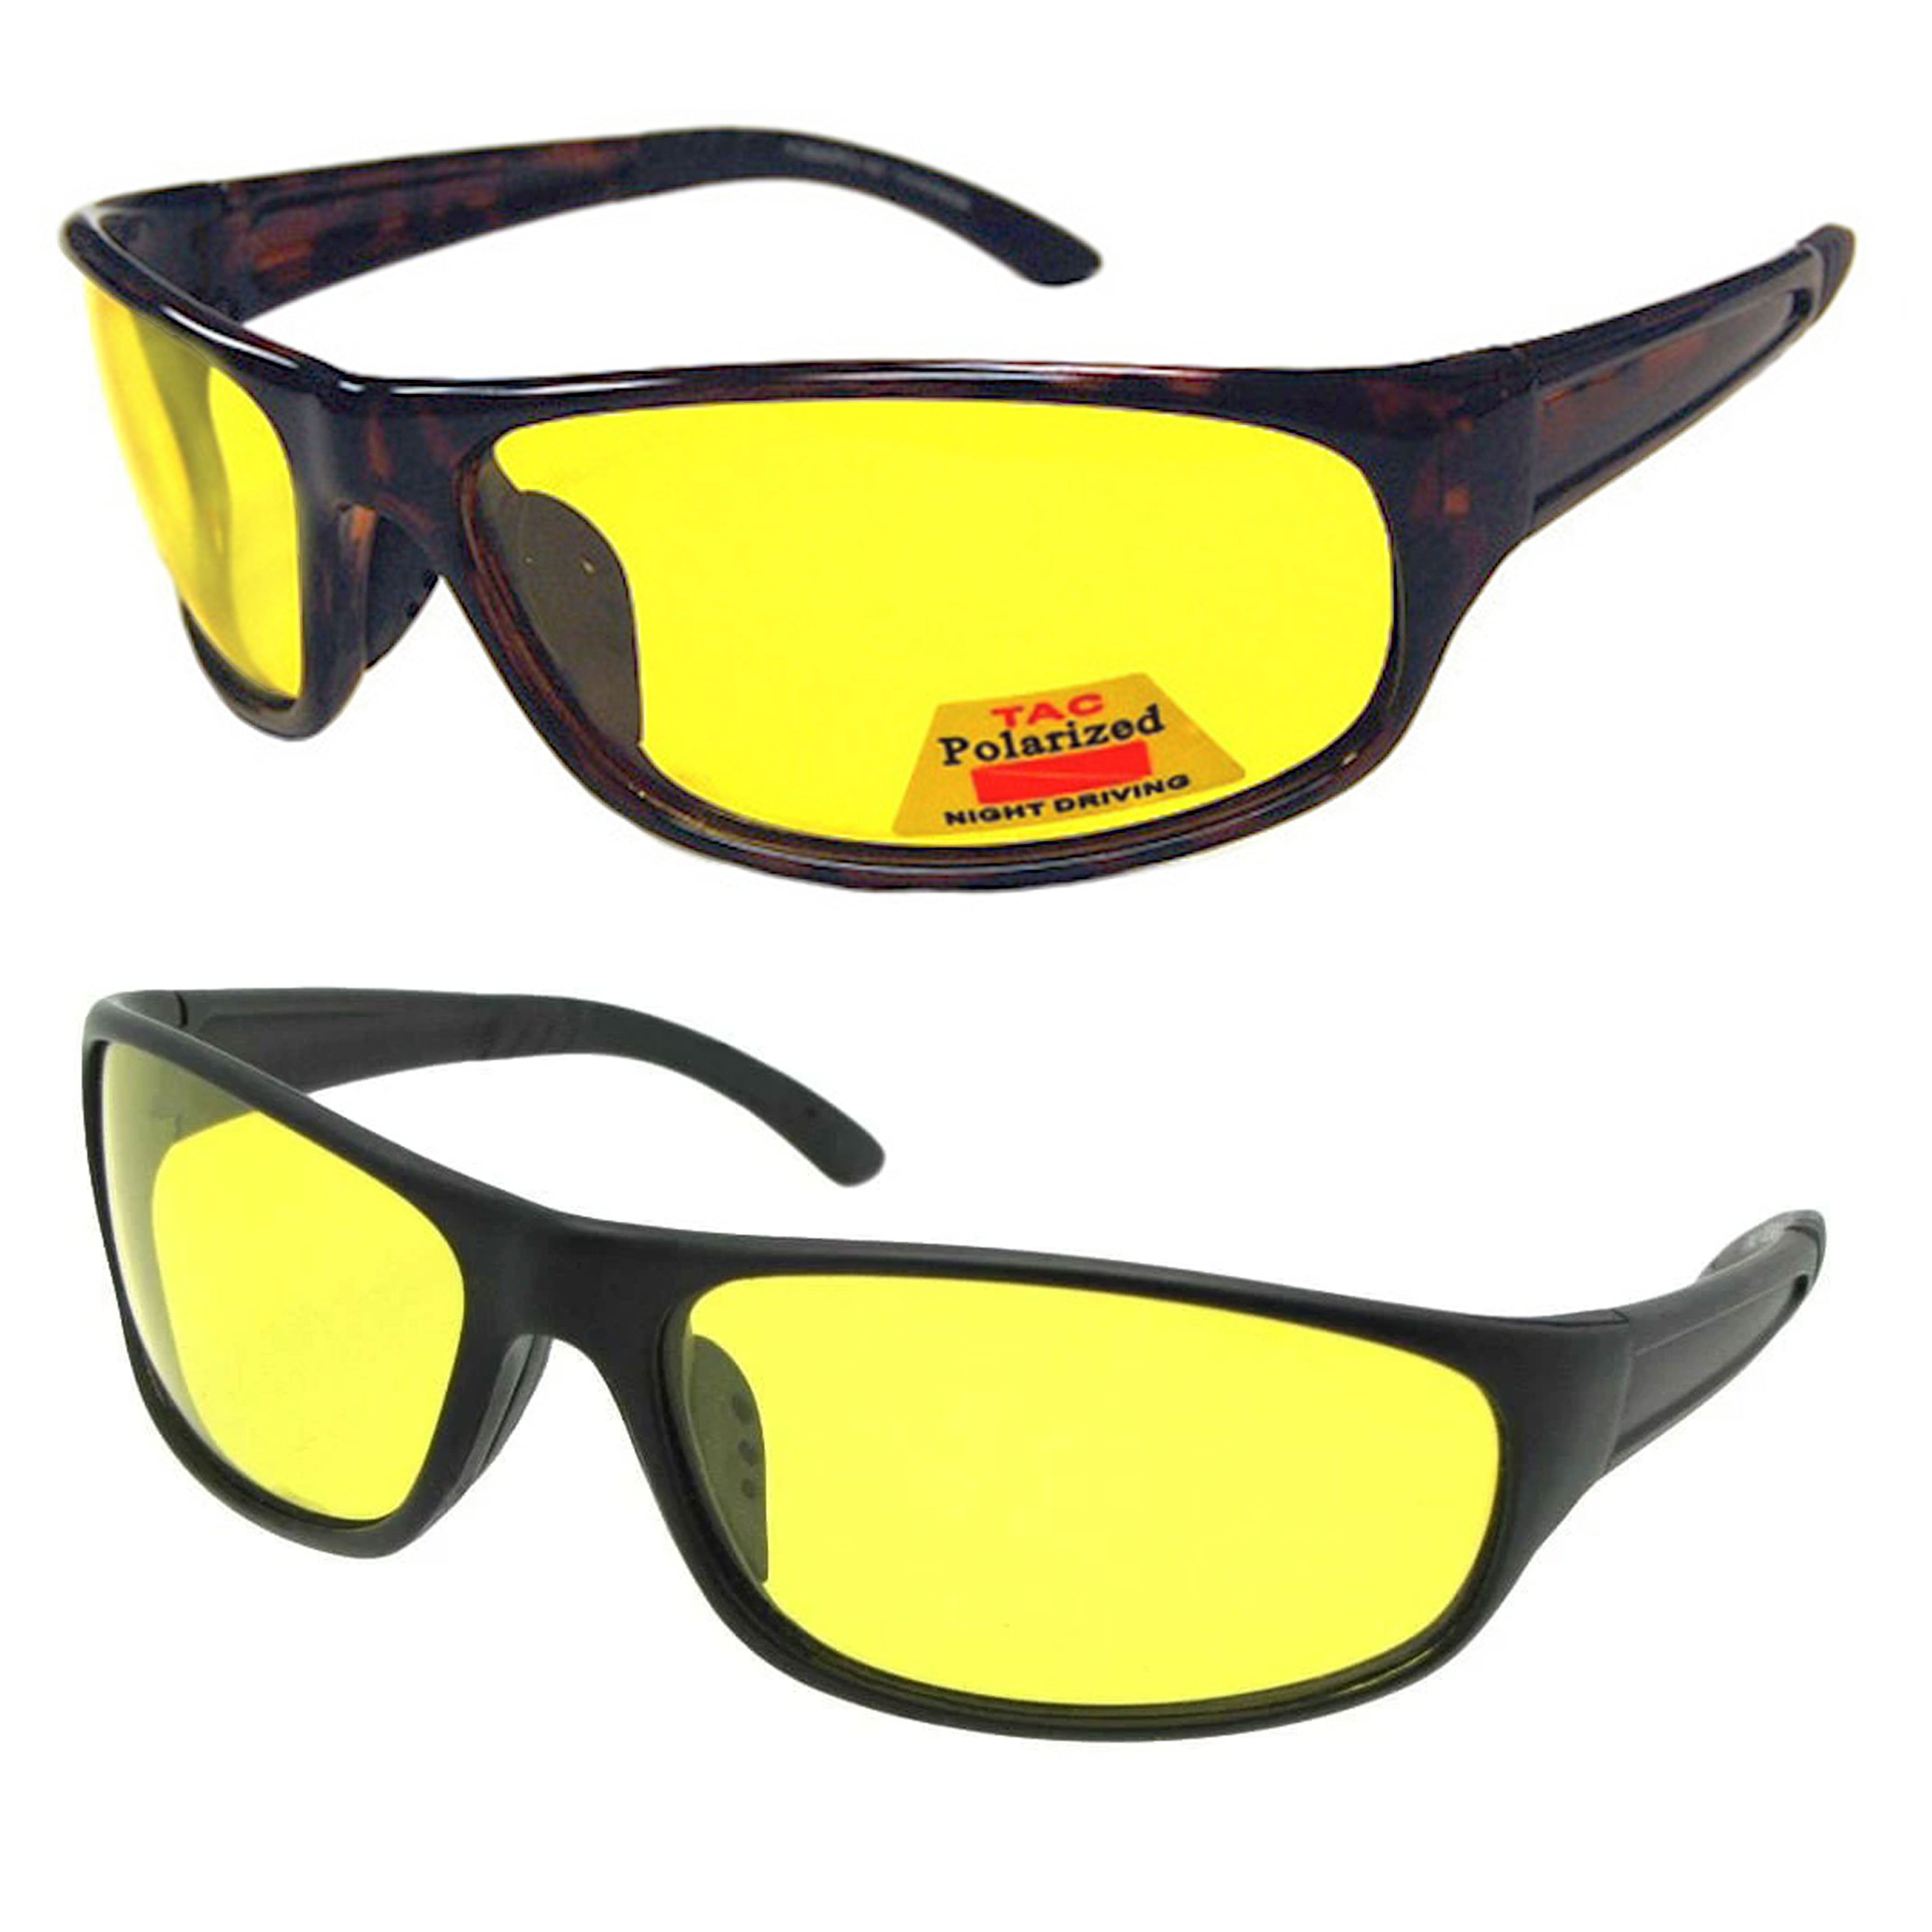 YELLOW POLARIZED HD Sunglasses Night Vision Driving Motorcycle Cycling Glasses